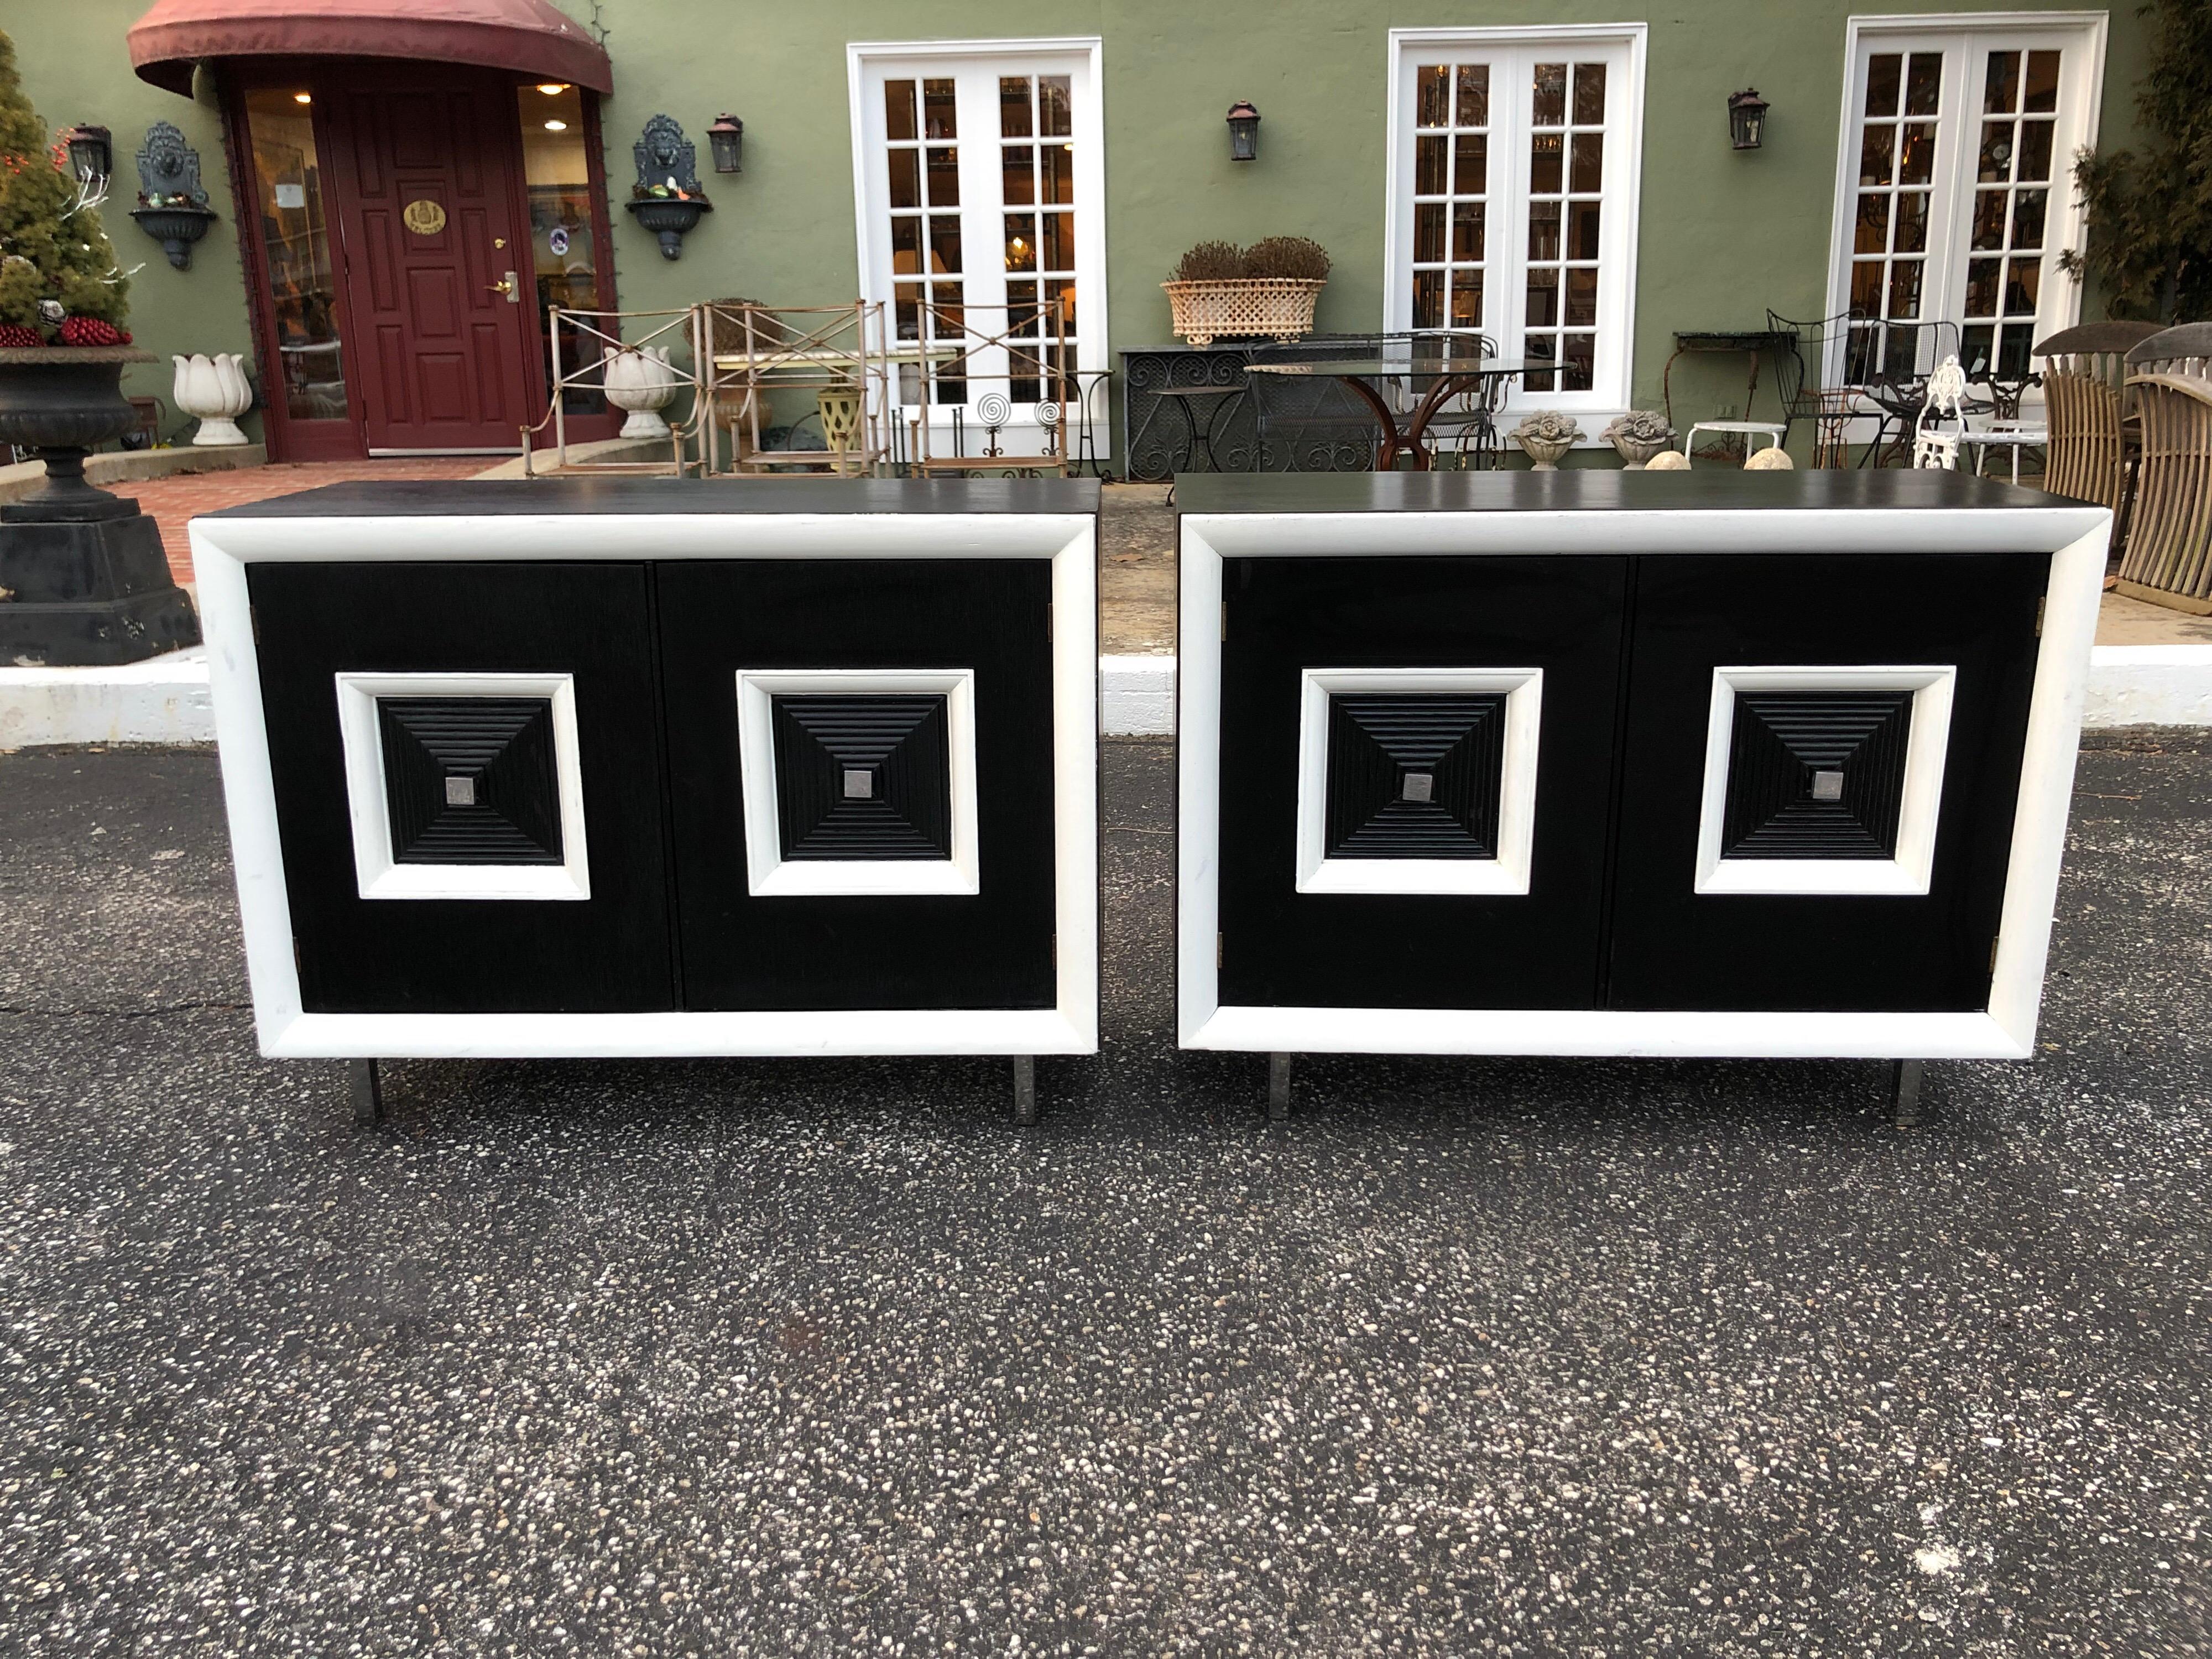 Pair of matching black and white Hollywood Regency cabinets. These stunning cabinets with paneled doors make a bold statement. Their dramatic black and white design pop with pizzazz. They would go with any deco or modern decor. They have excellent